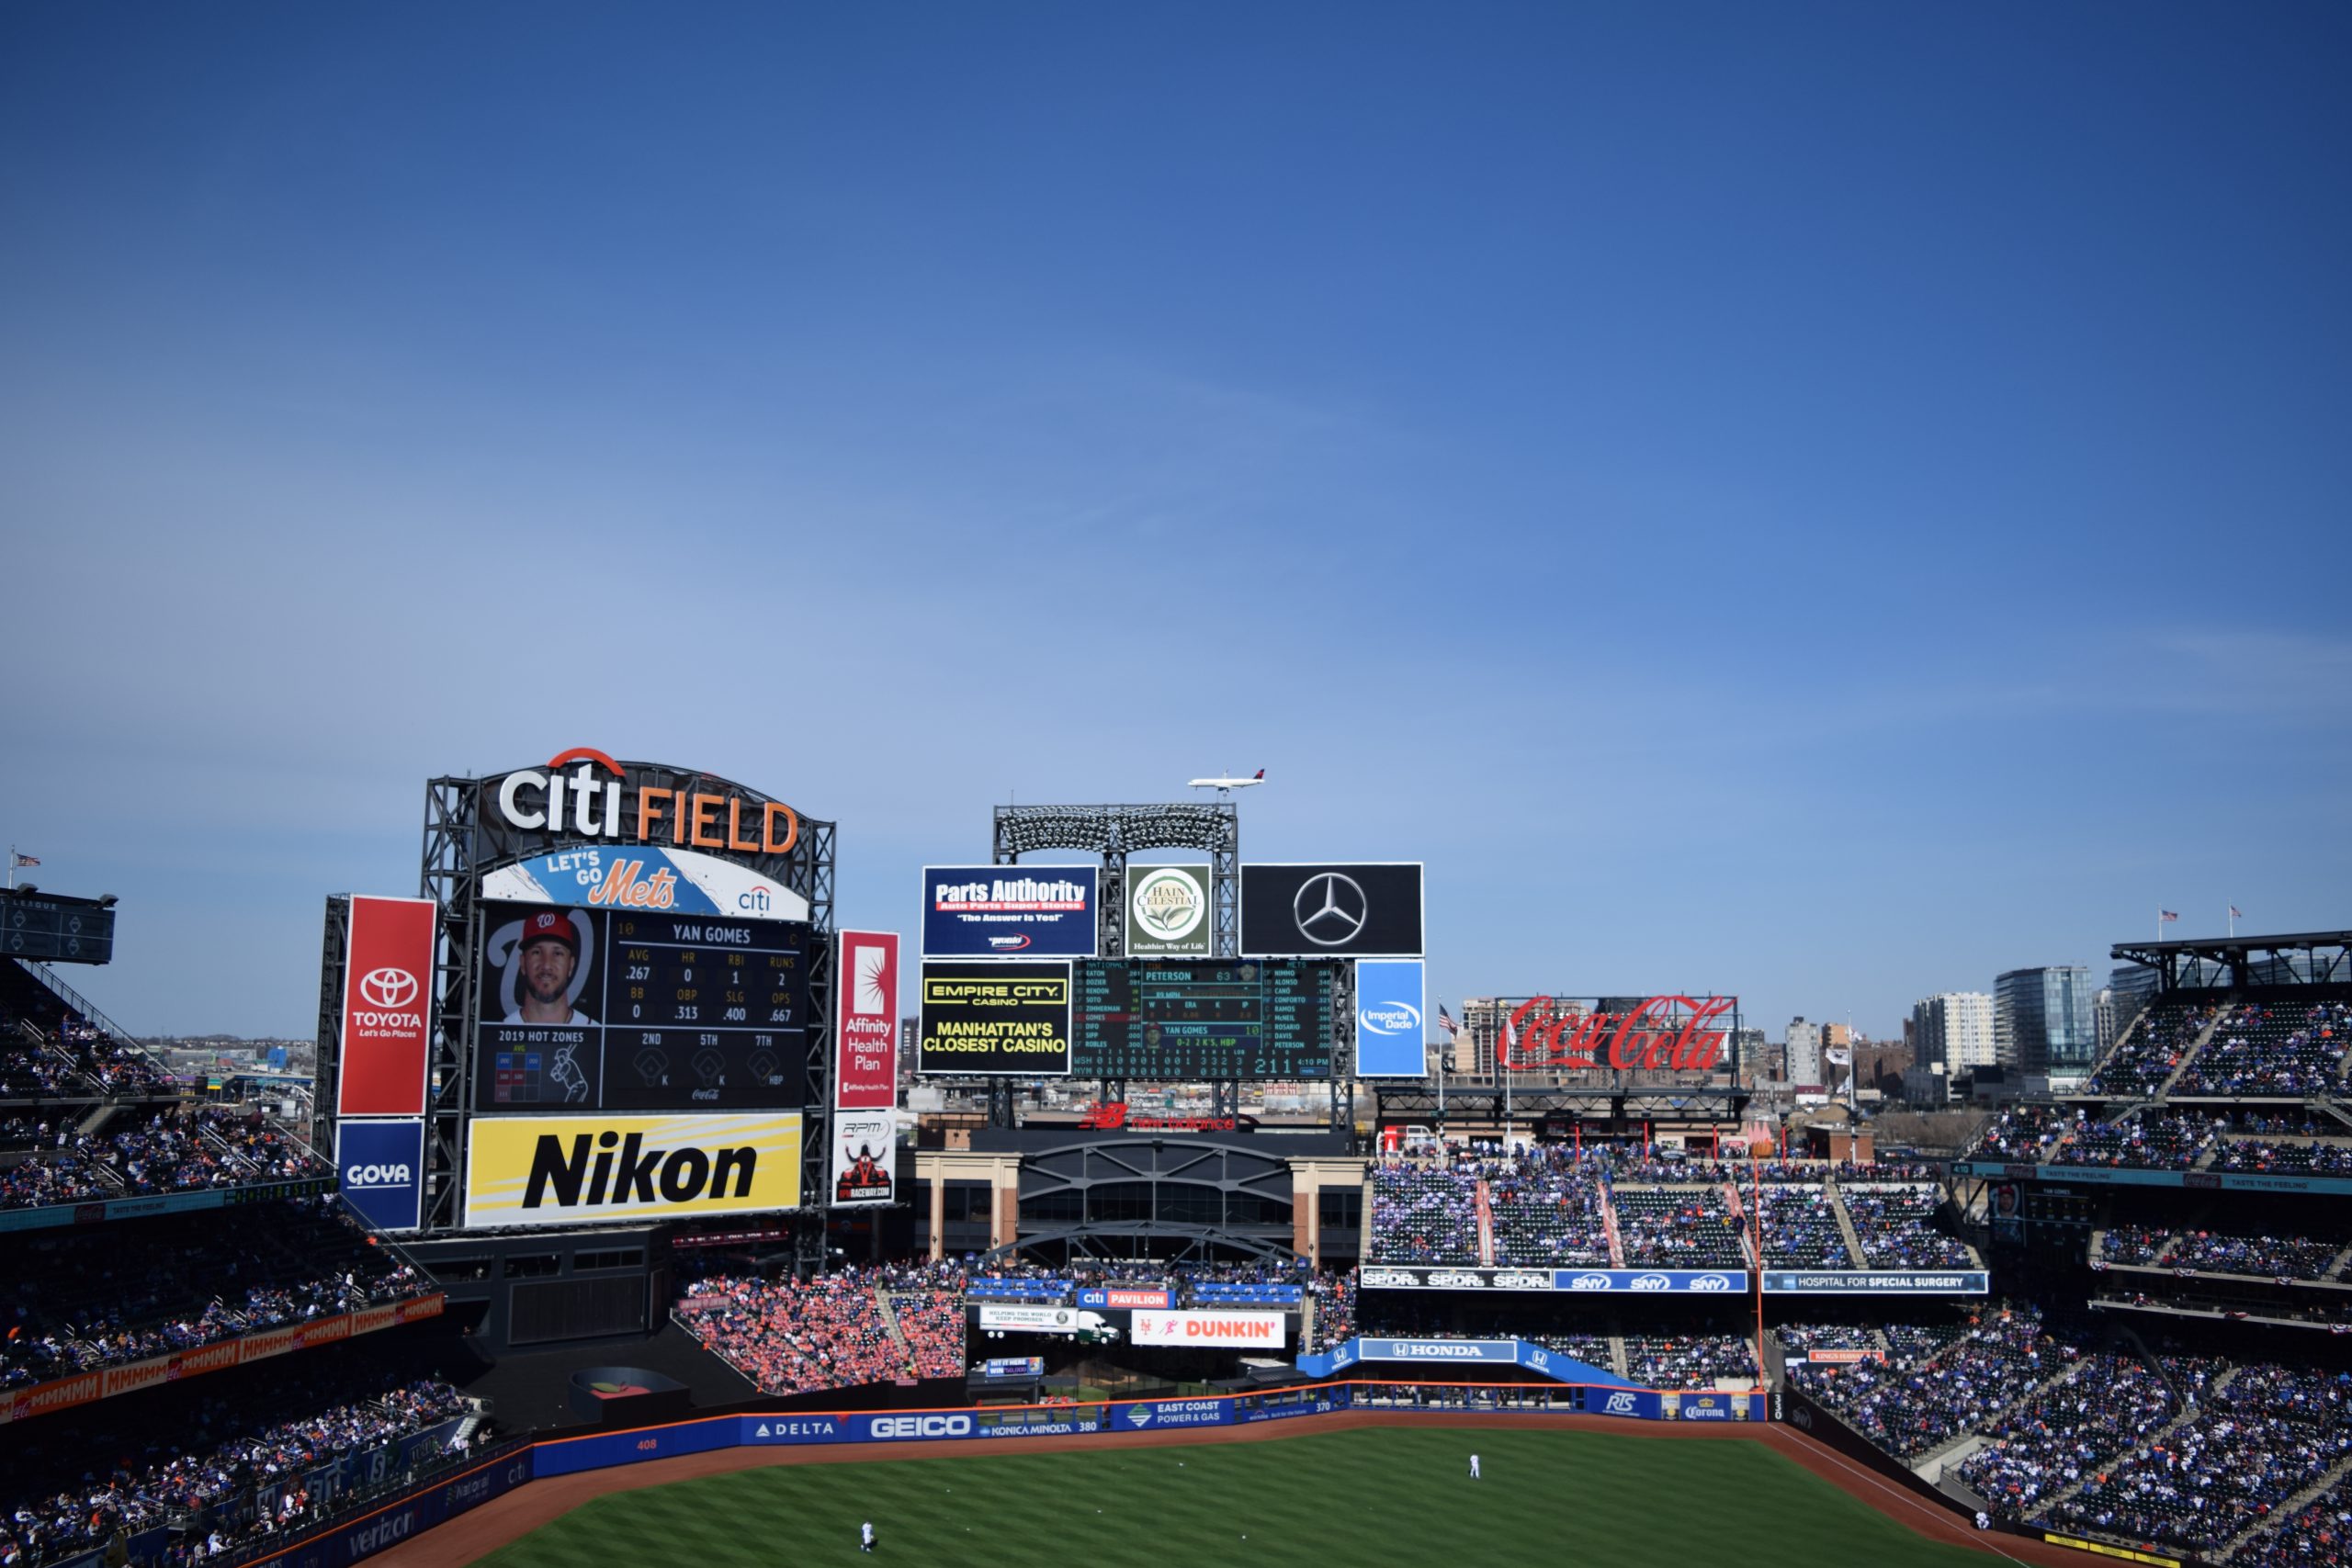 Mets to unveil humongous new scoreboard at Citi Field